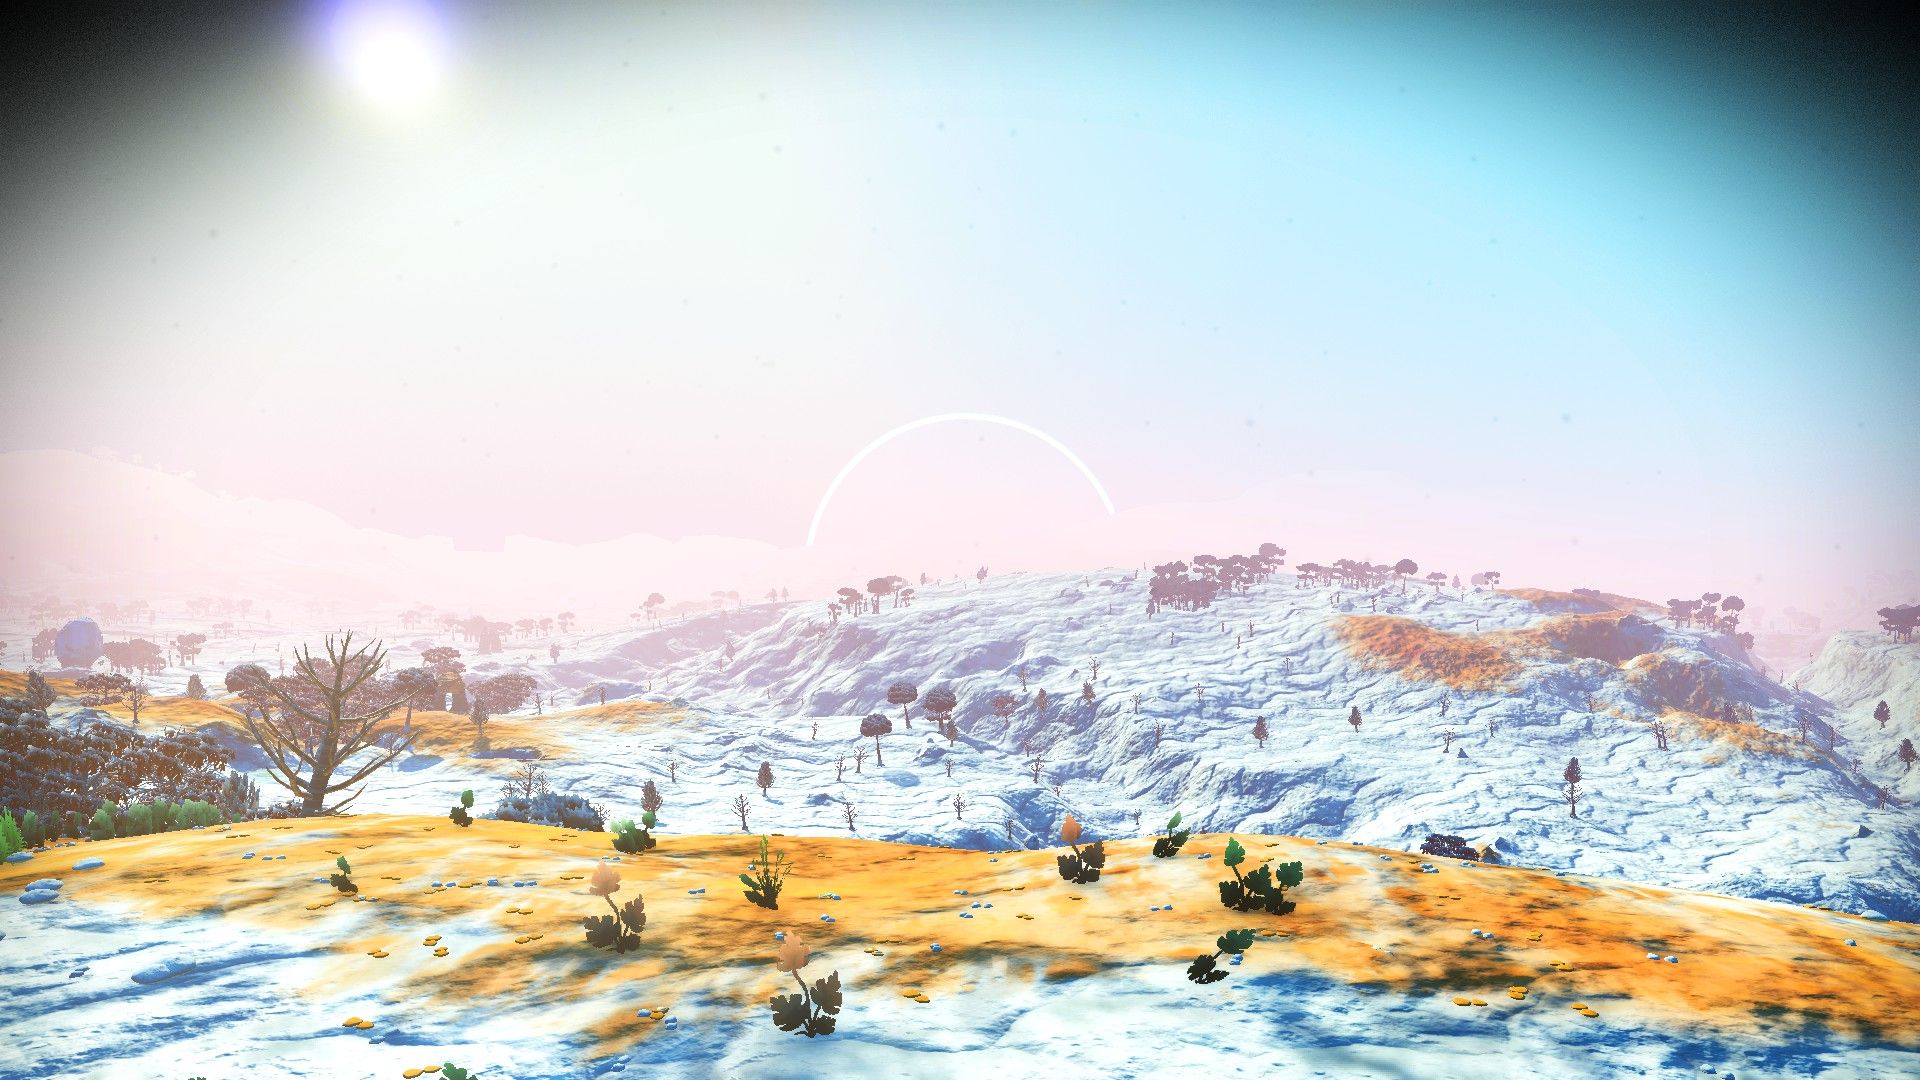 Amazing photos of space as captured in No Mans Sky image 3